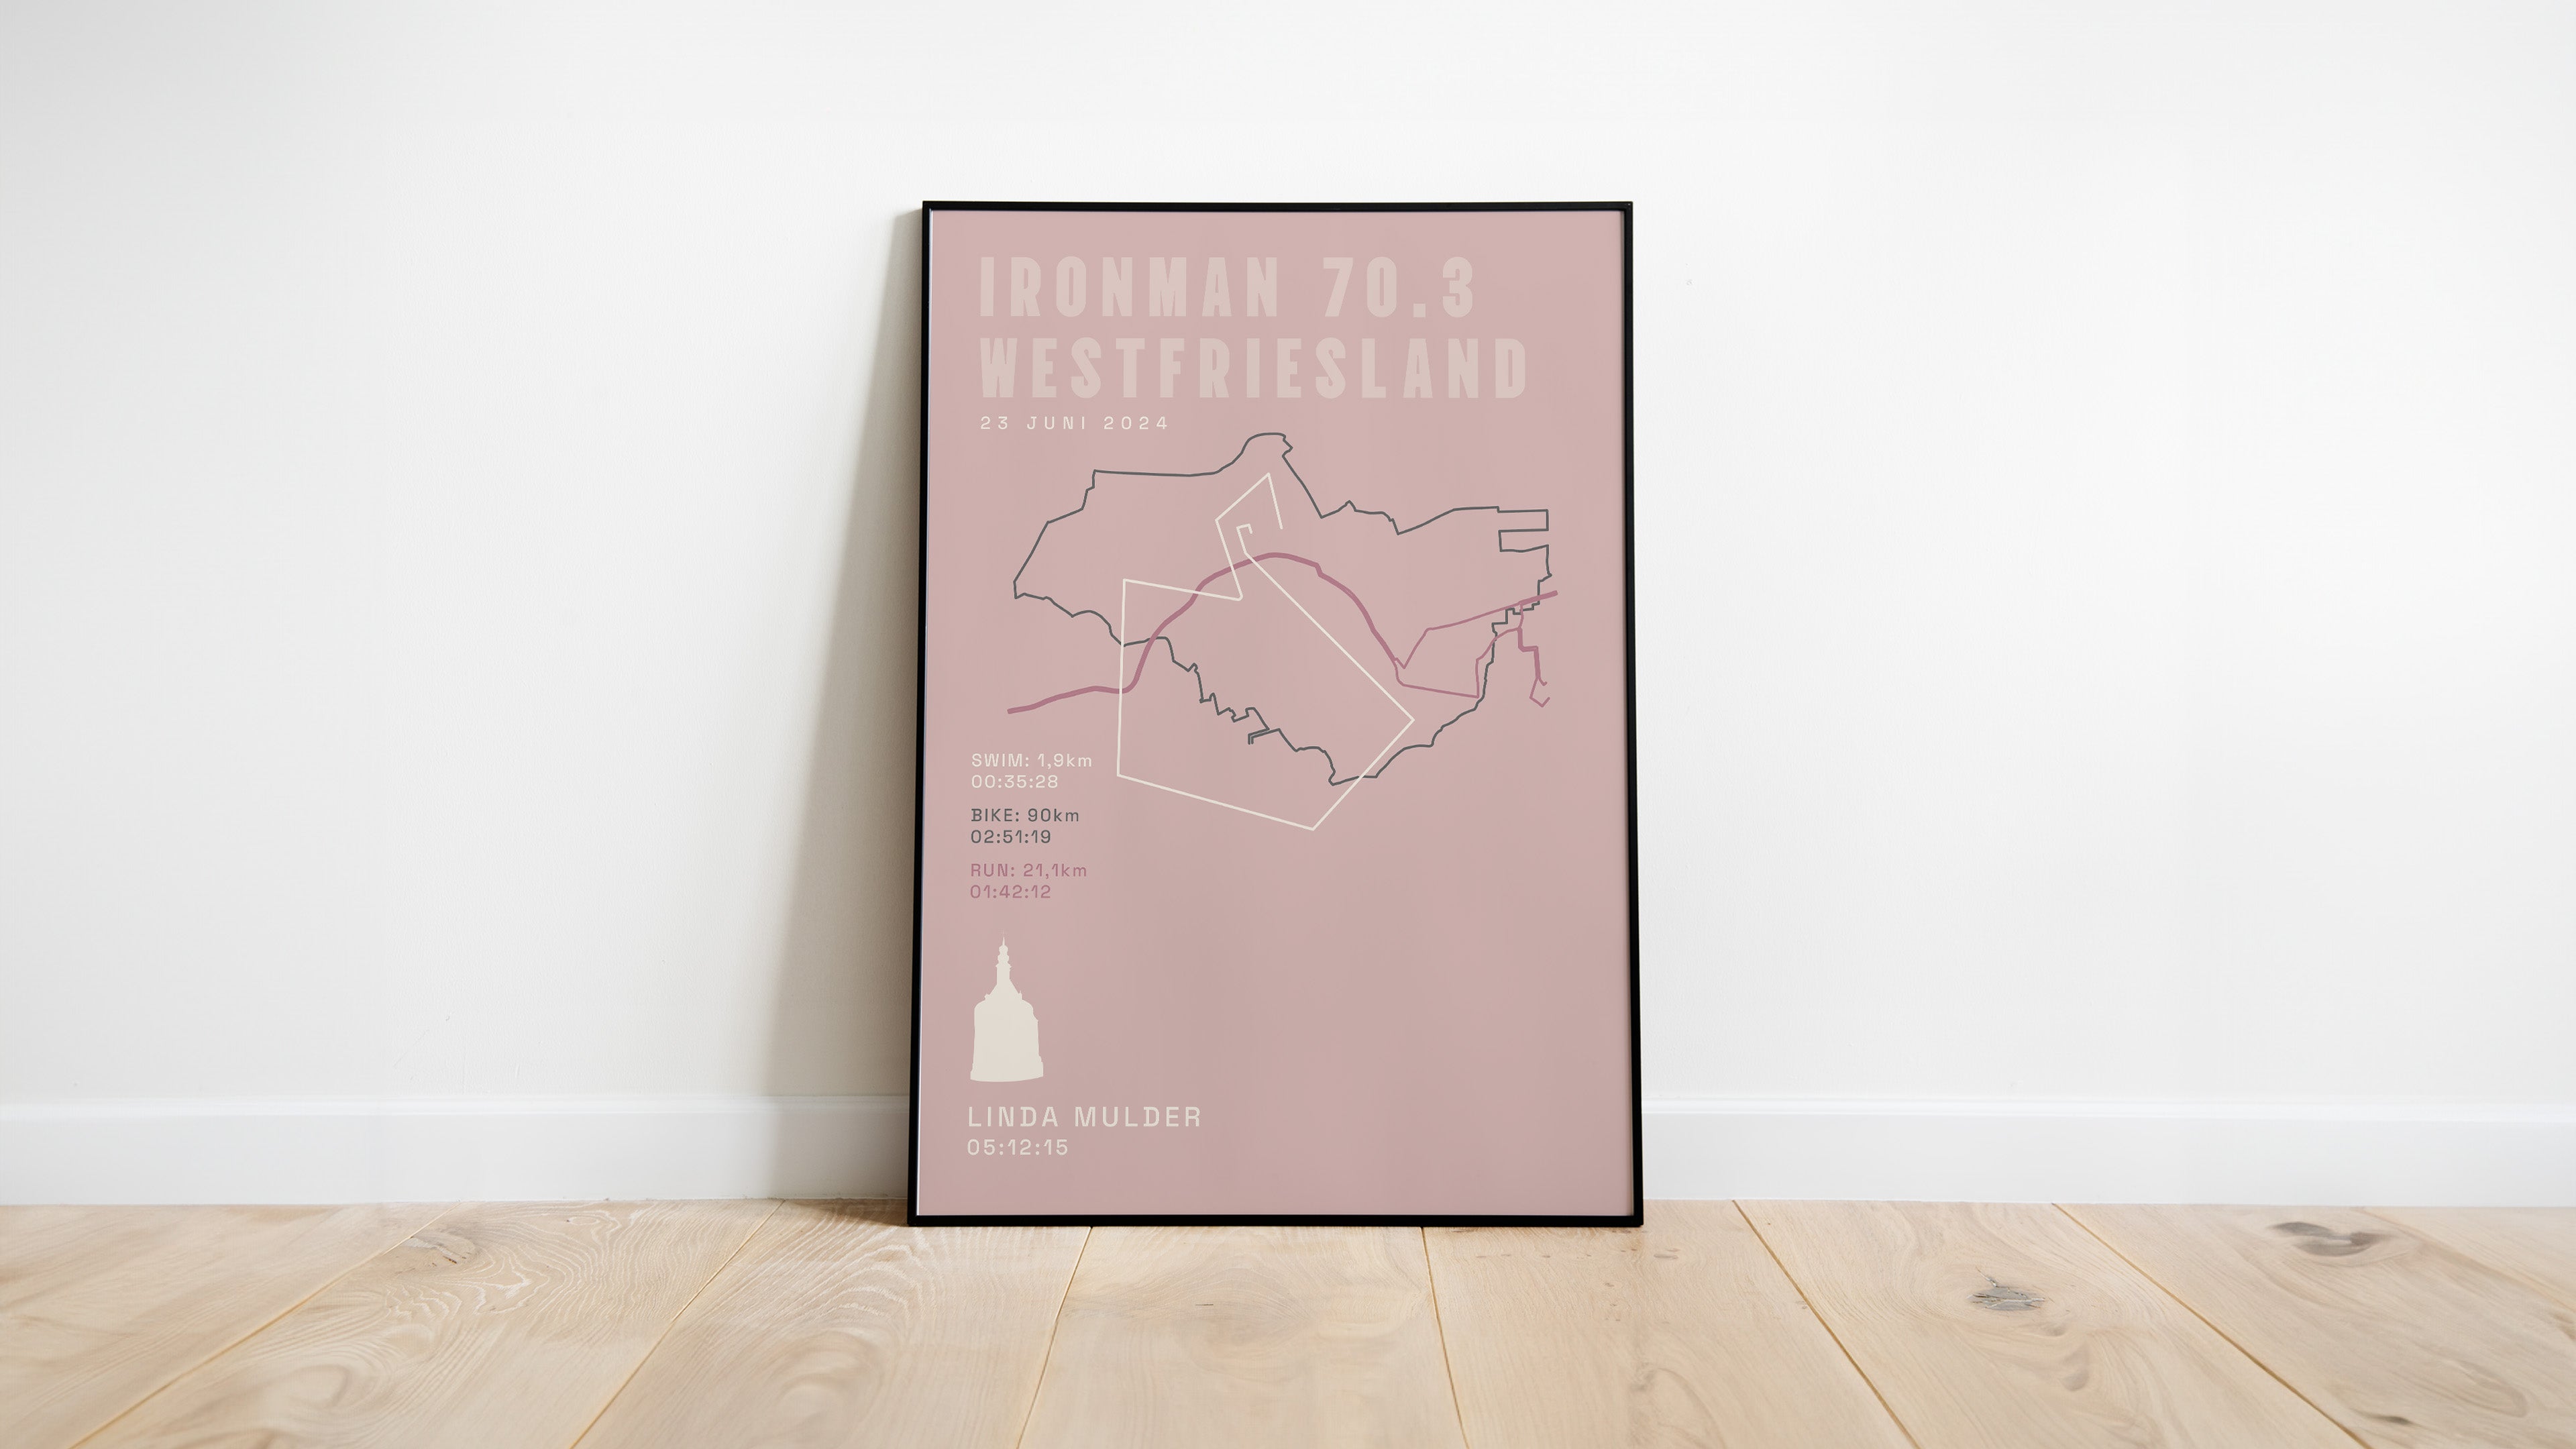 Ironman 70.3 Westfriesland - Classic Solid - Poster